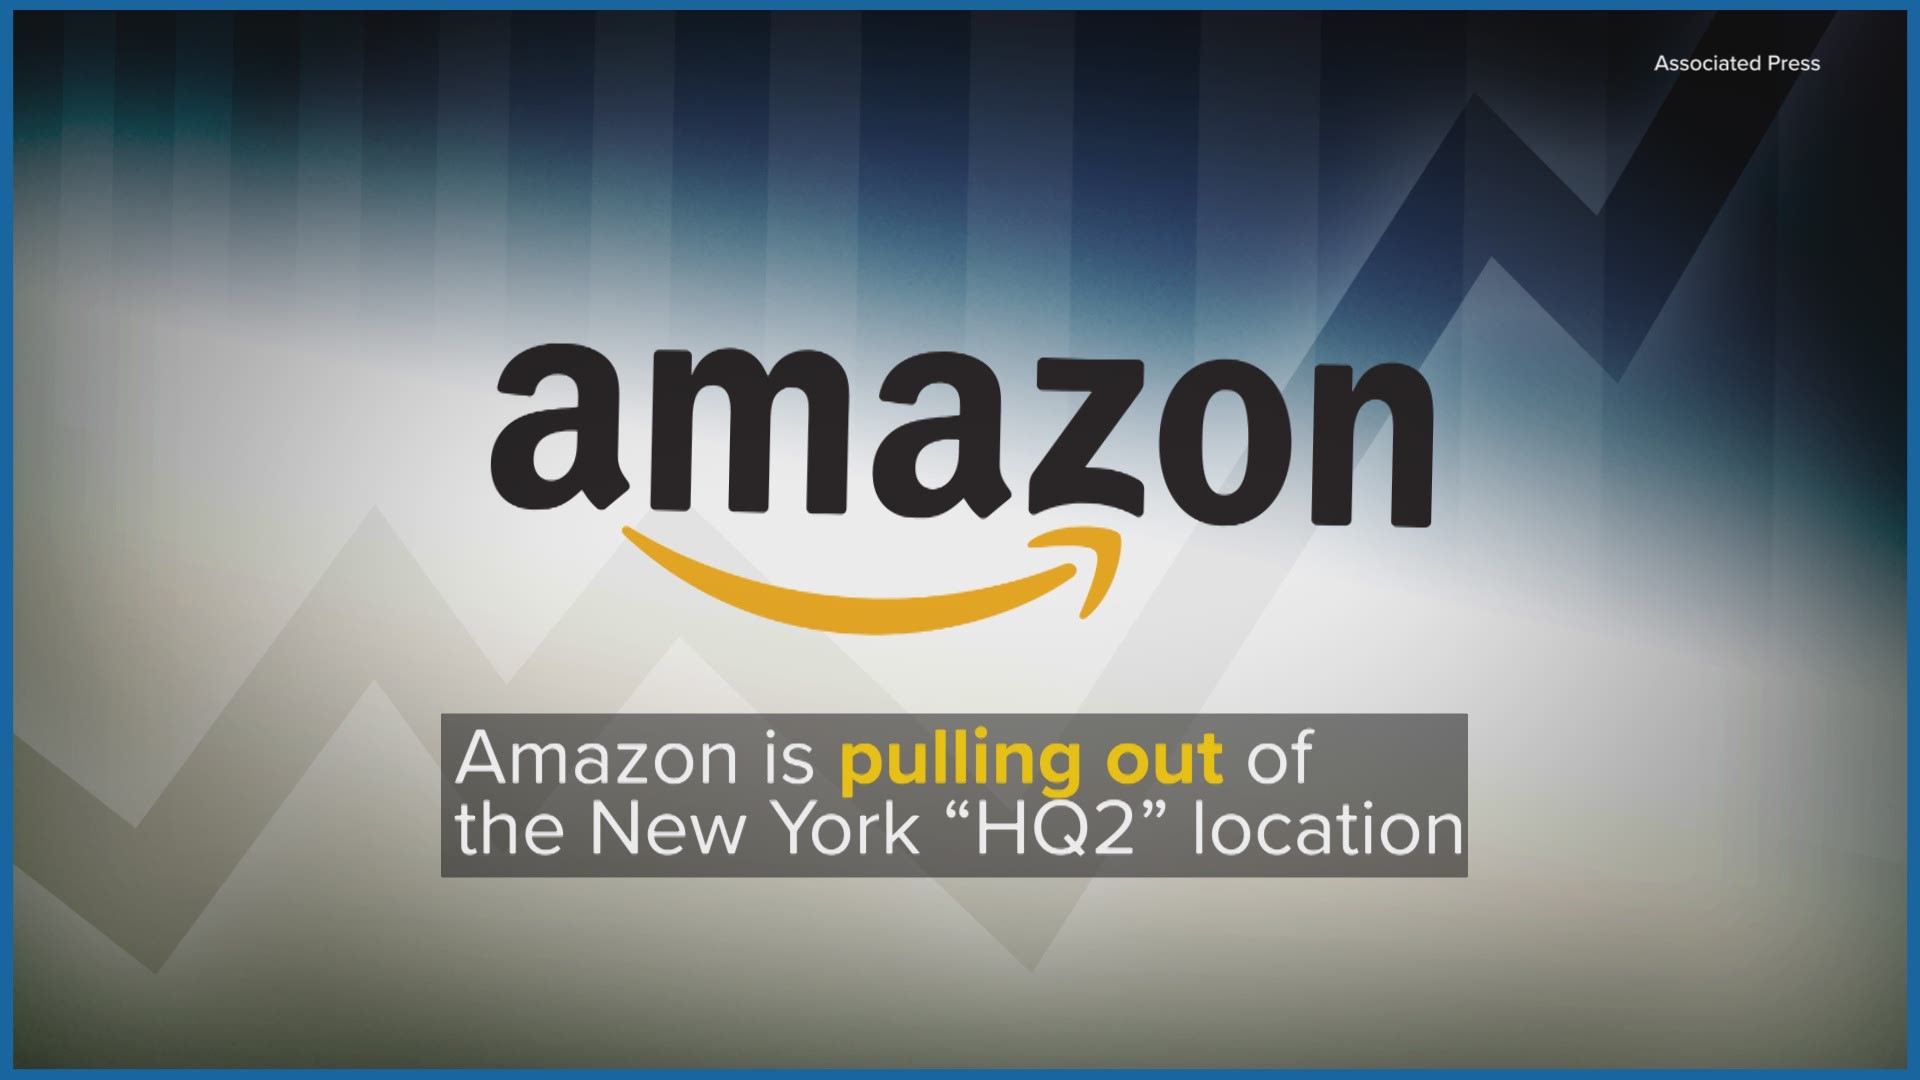 In a stunning reversal, Amazon is ditching plans to build a second headquarters in Queens.